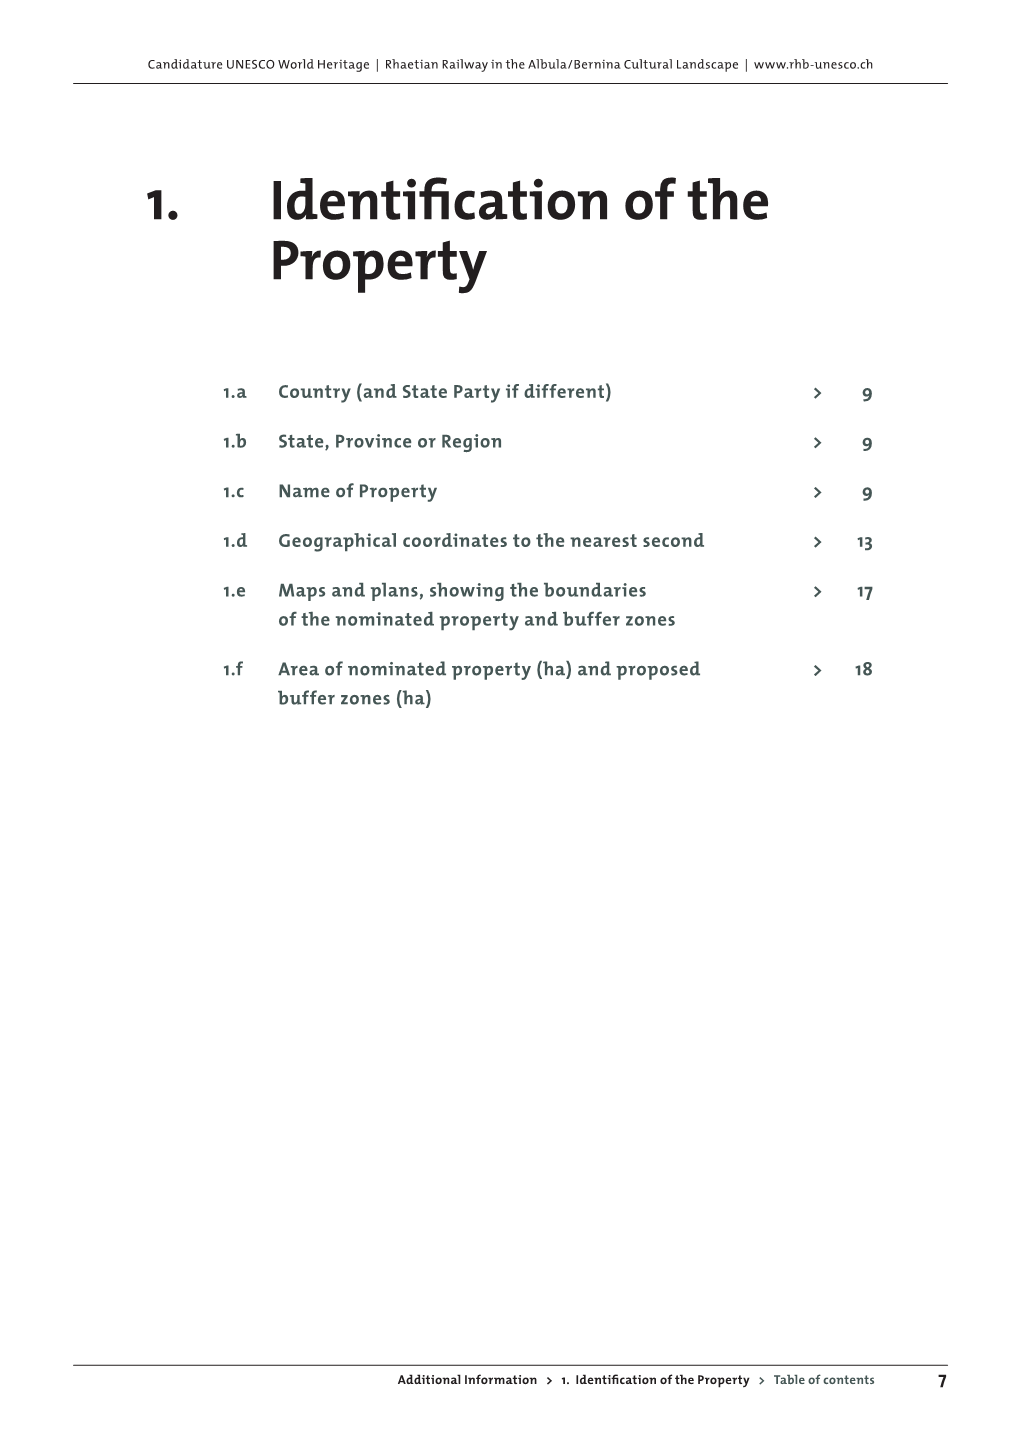 1. Identification of the Property